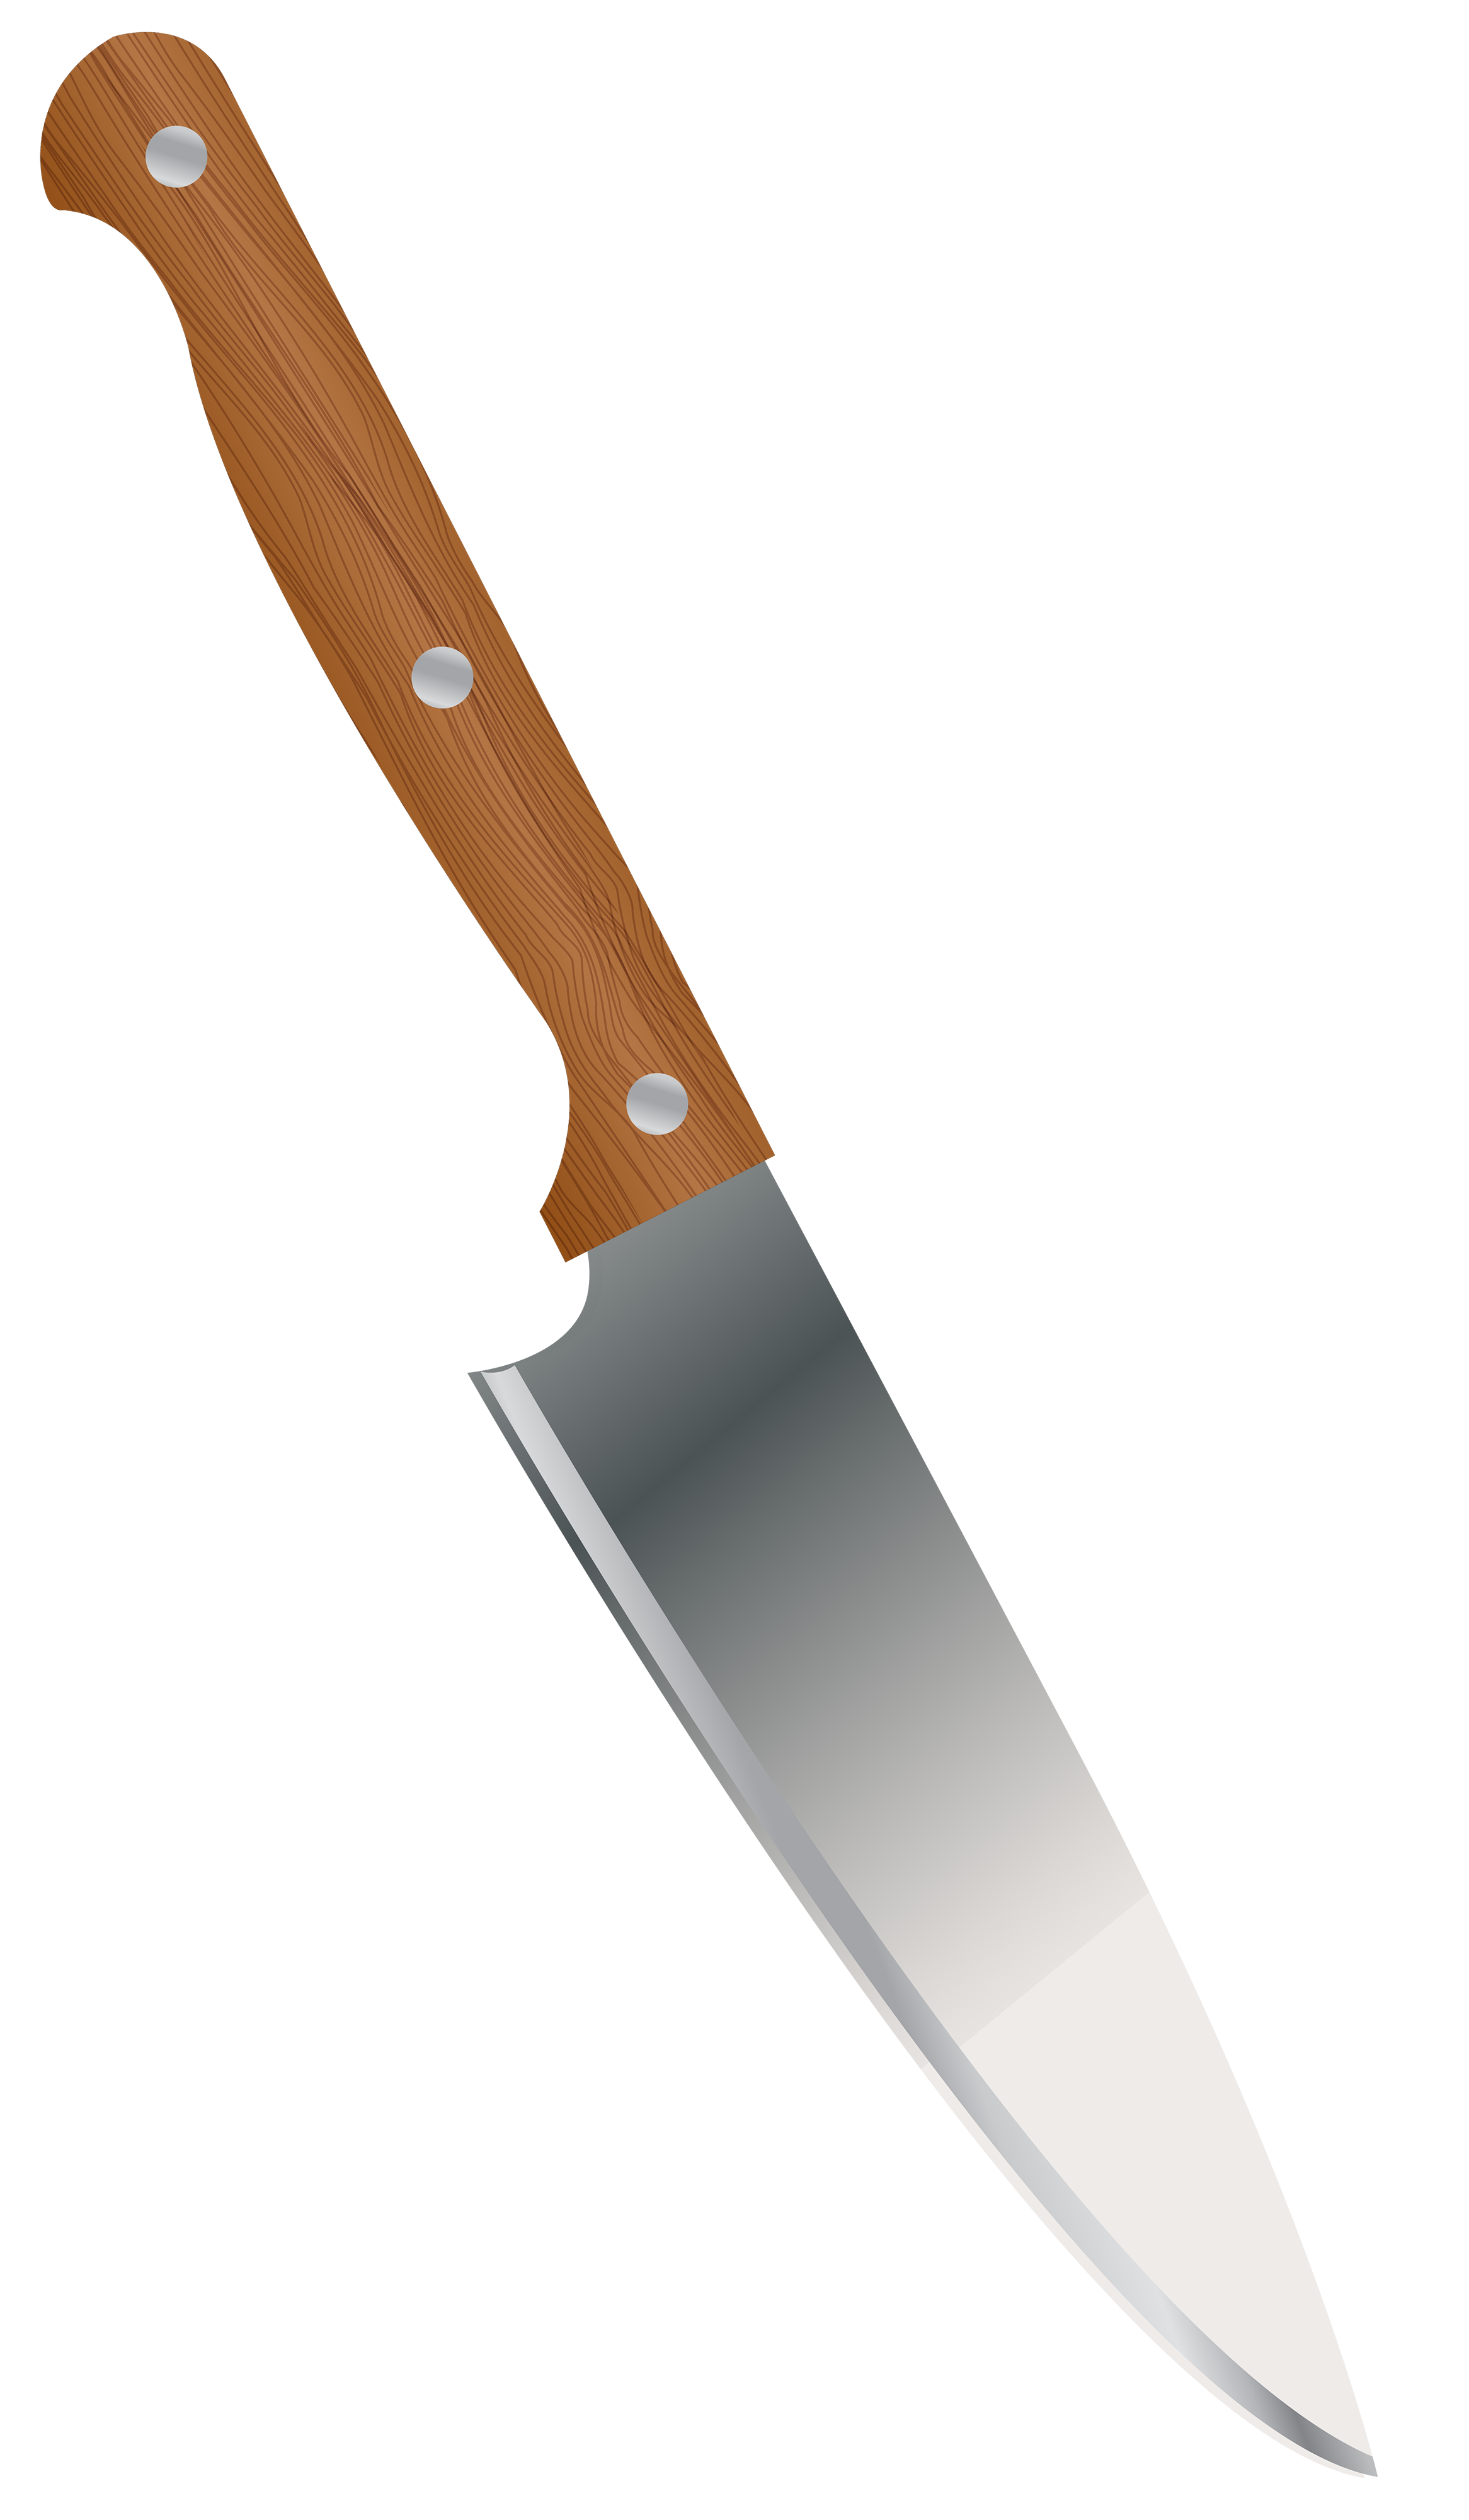 clipart of knife - photo #23